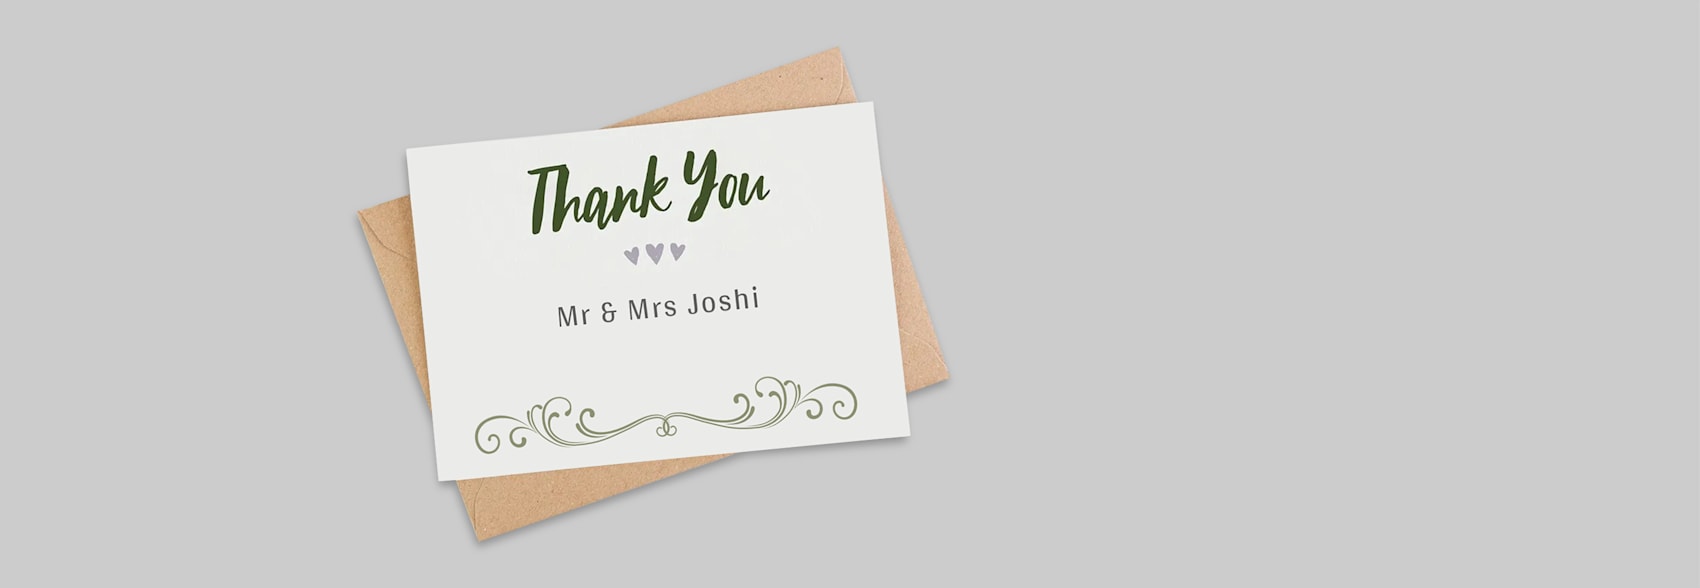 Larger version: Thank You Cards